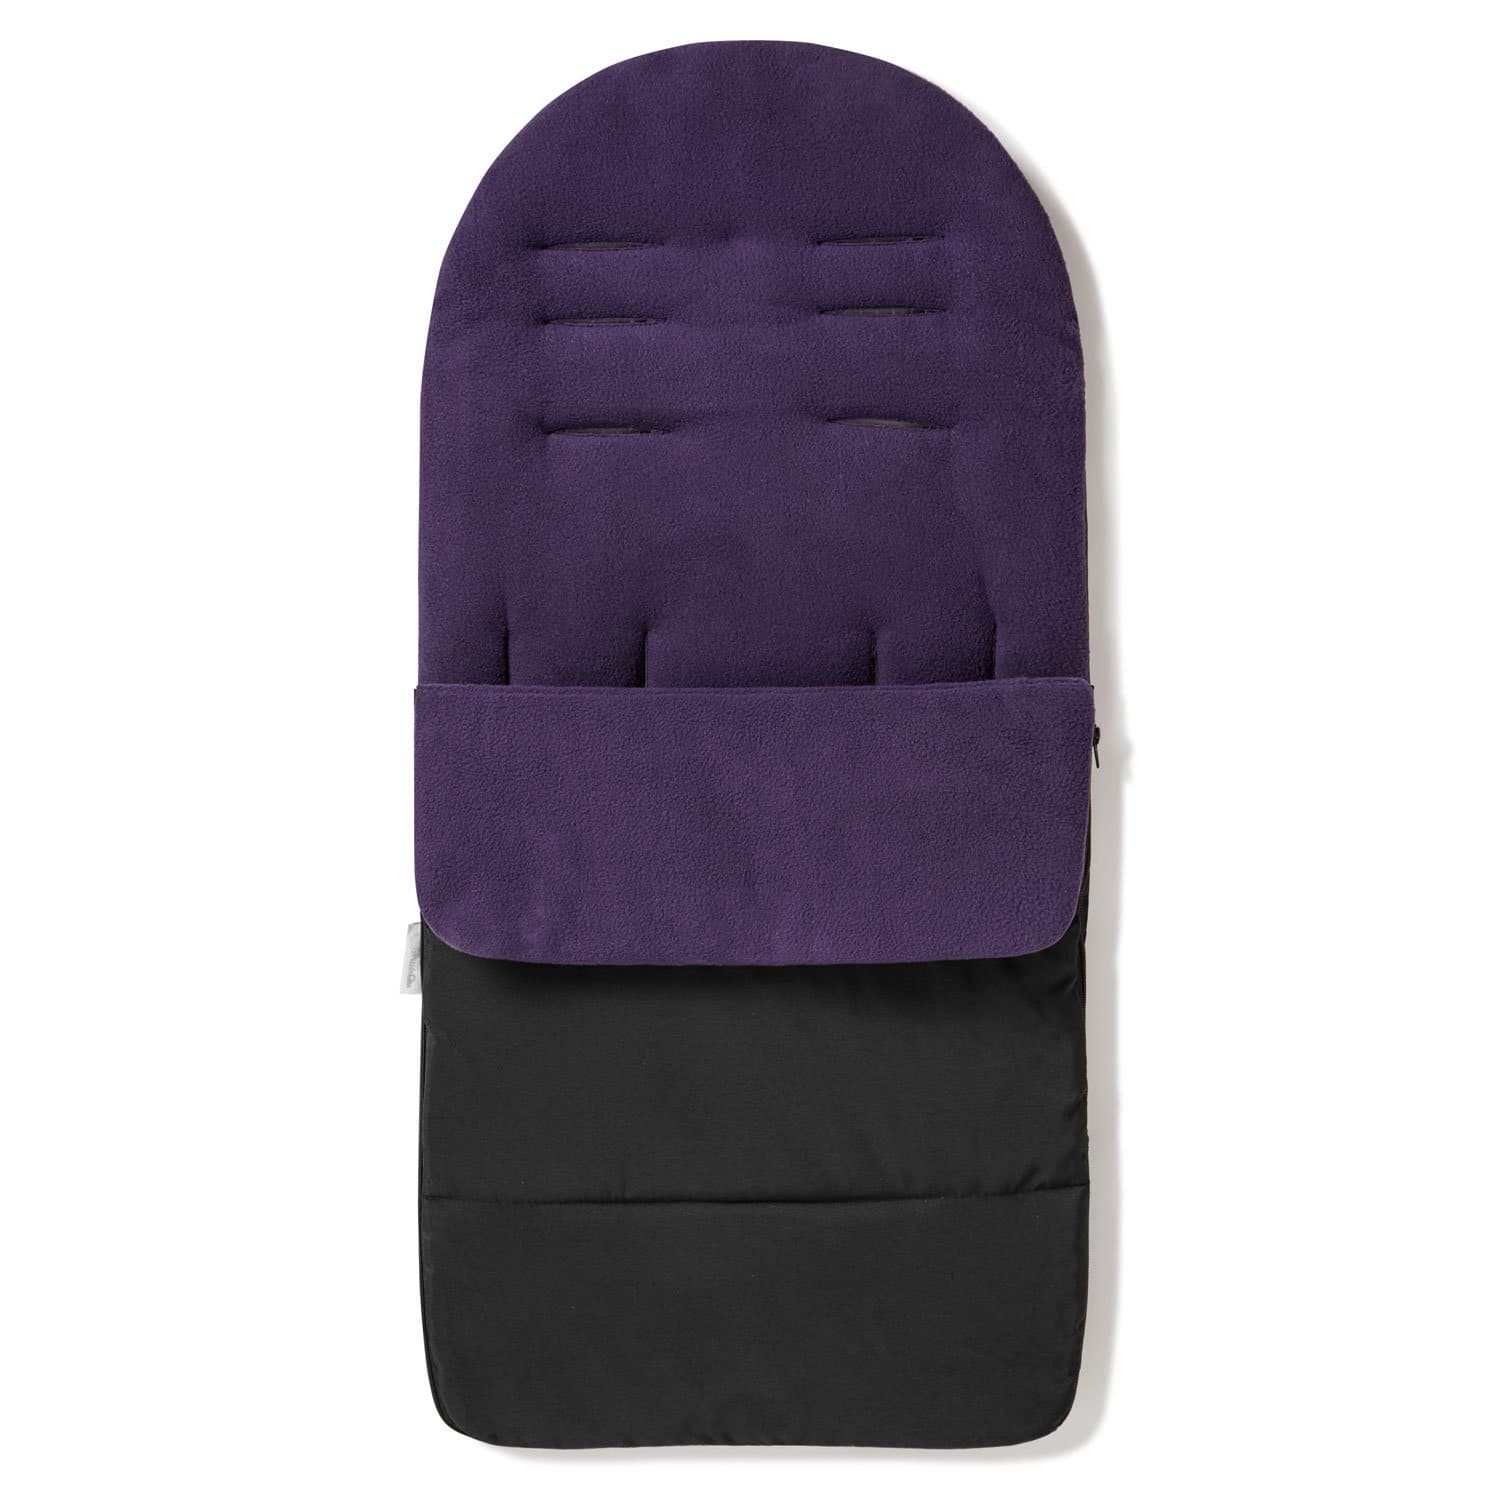 Premium Footmuff / Cosy Toes Compatible with Babystyle - Plum Purple / Fits All Models | For Your Little One